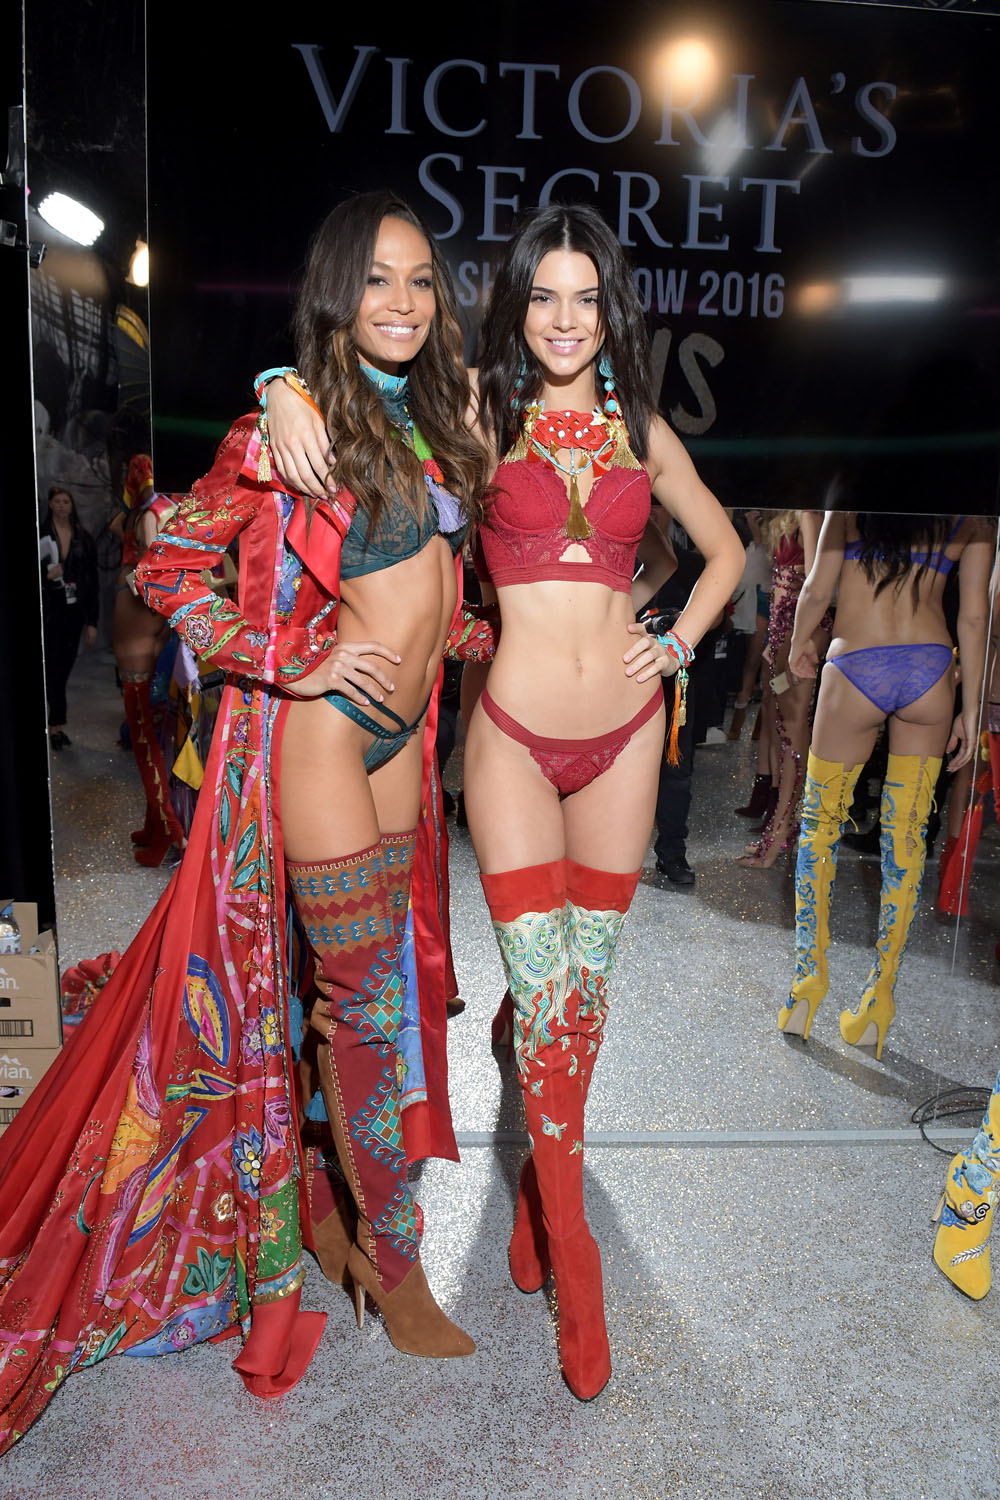 PARIS, FRANCE - NOVEMBER 30: (L-R) Joan Smalls and Kendall Jenner pose backstage during the Victoria's Secret Fashion Show on November 30, 2016 in Paris, France. (Photo by Dominique Charriau/Getty Images for Victoria's Secret)